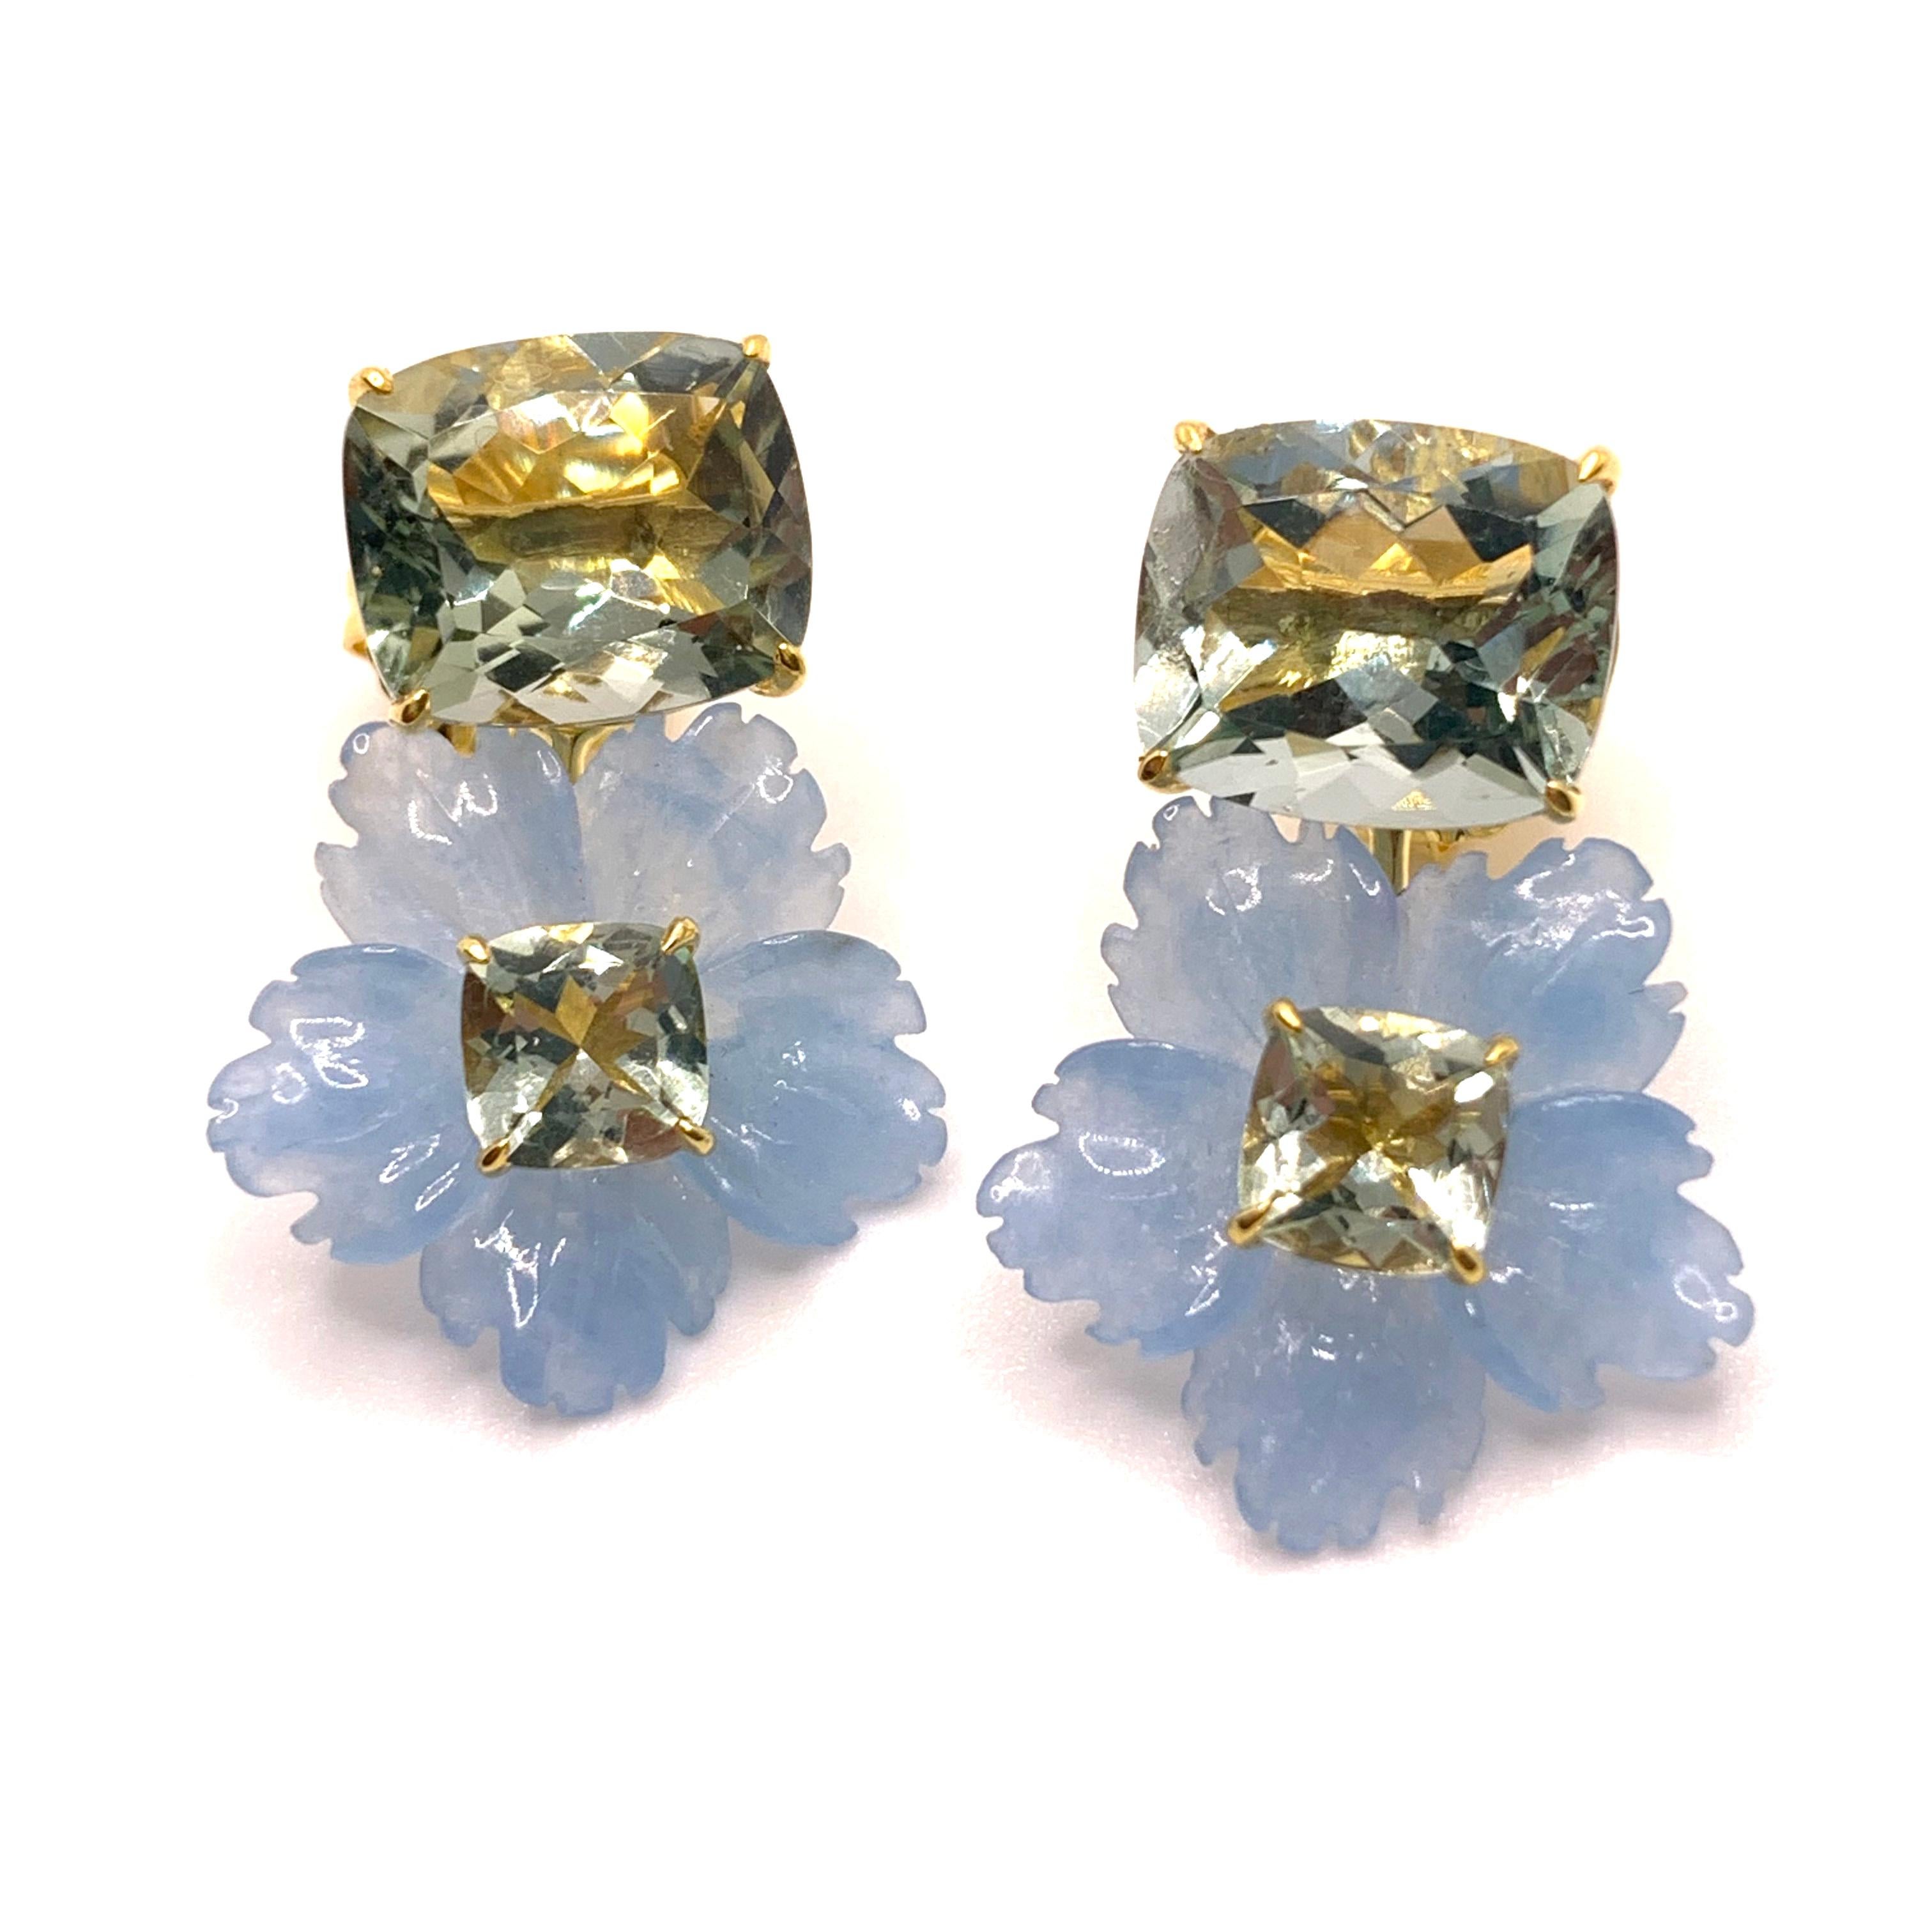 Stunning Cushion-cut Prasiolite and Carved Blue Quartzite Flower Drop Earrings In New Condition For Sale In Los Angeles, CA